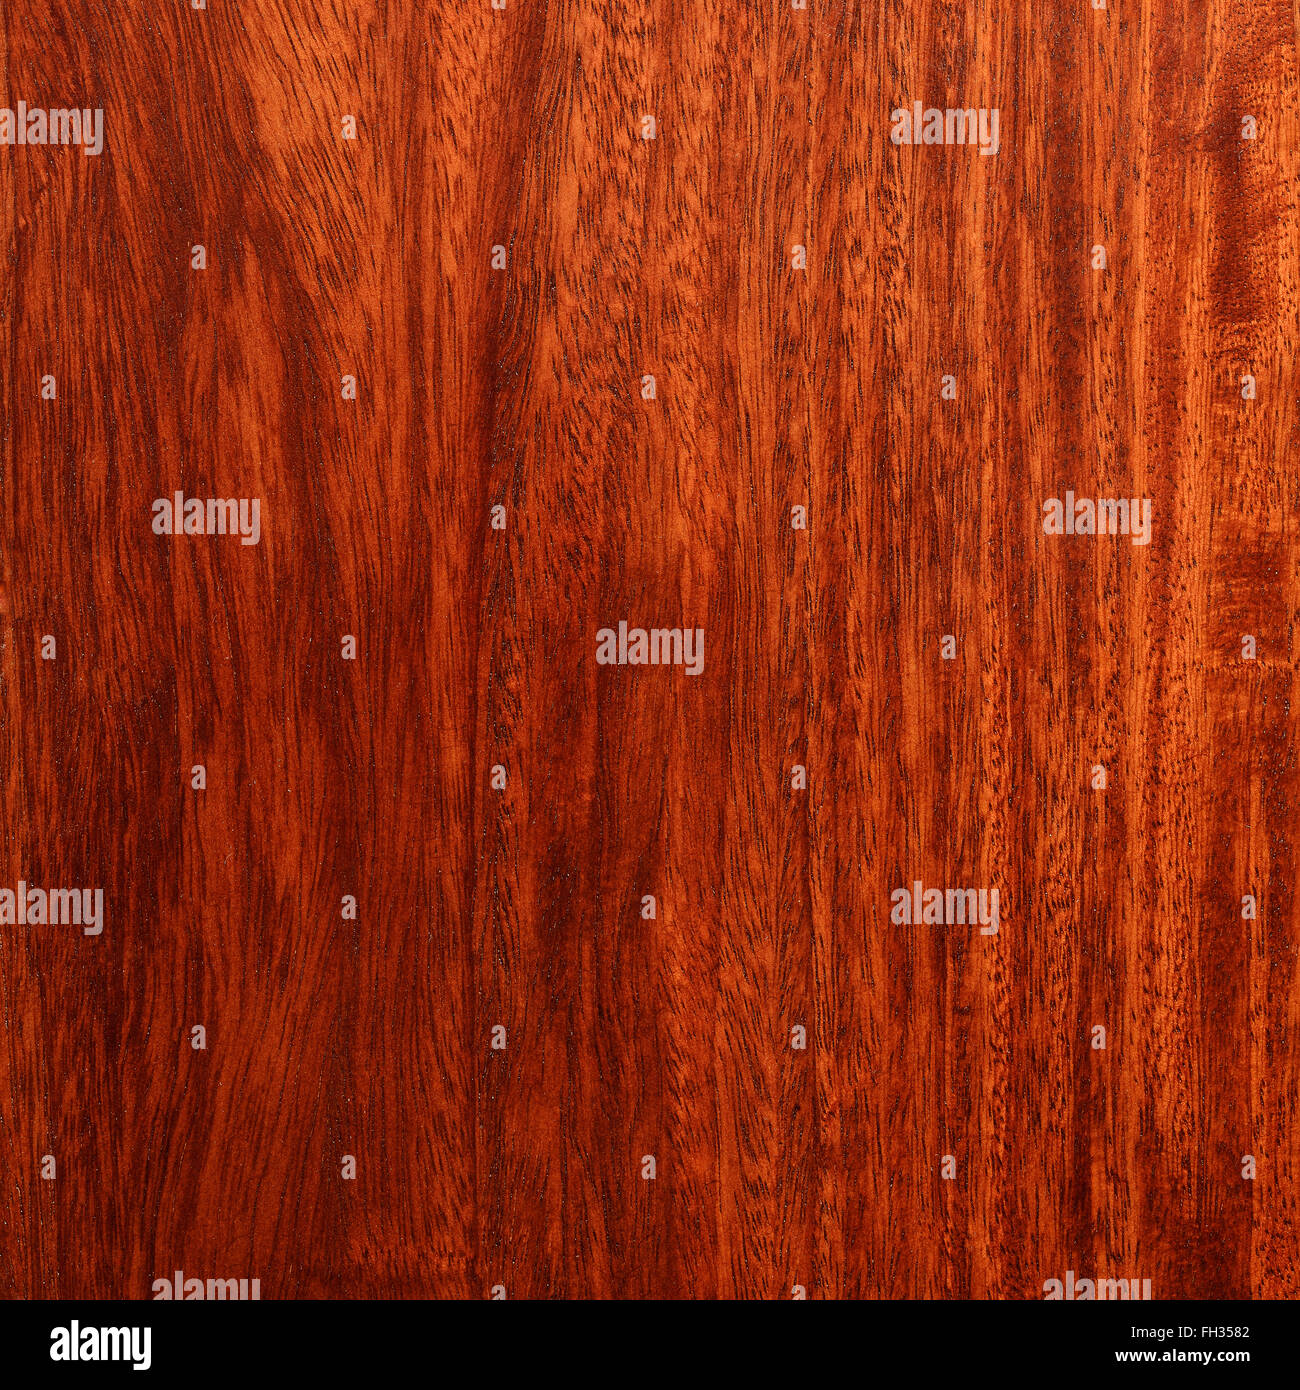 Textured Brown Wood Stock Photo